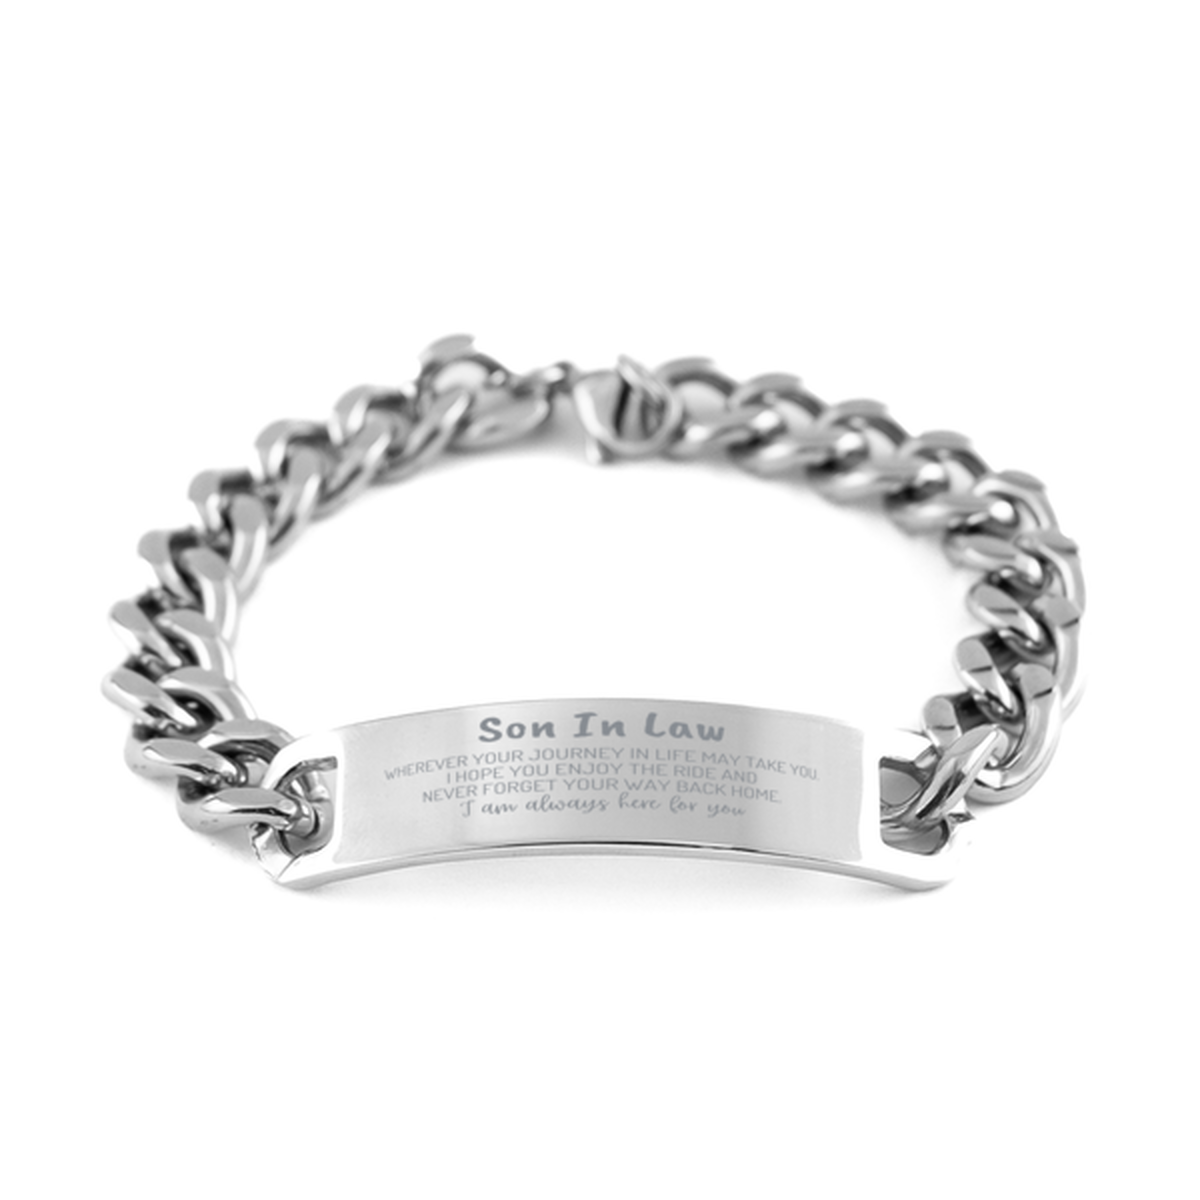 Son In Law wherever your journey in life may take you, I am always here for you Son In Law Cuban Chain Stainless Steel Bracelet, Awesome Christmas Gifts For Son In Law, Son In Law Birthday Gifts for Men Women Family Loved One